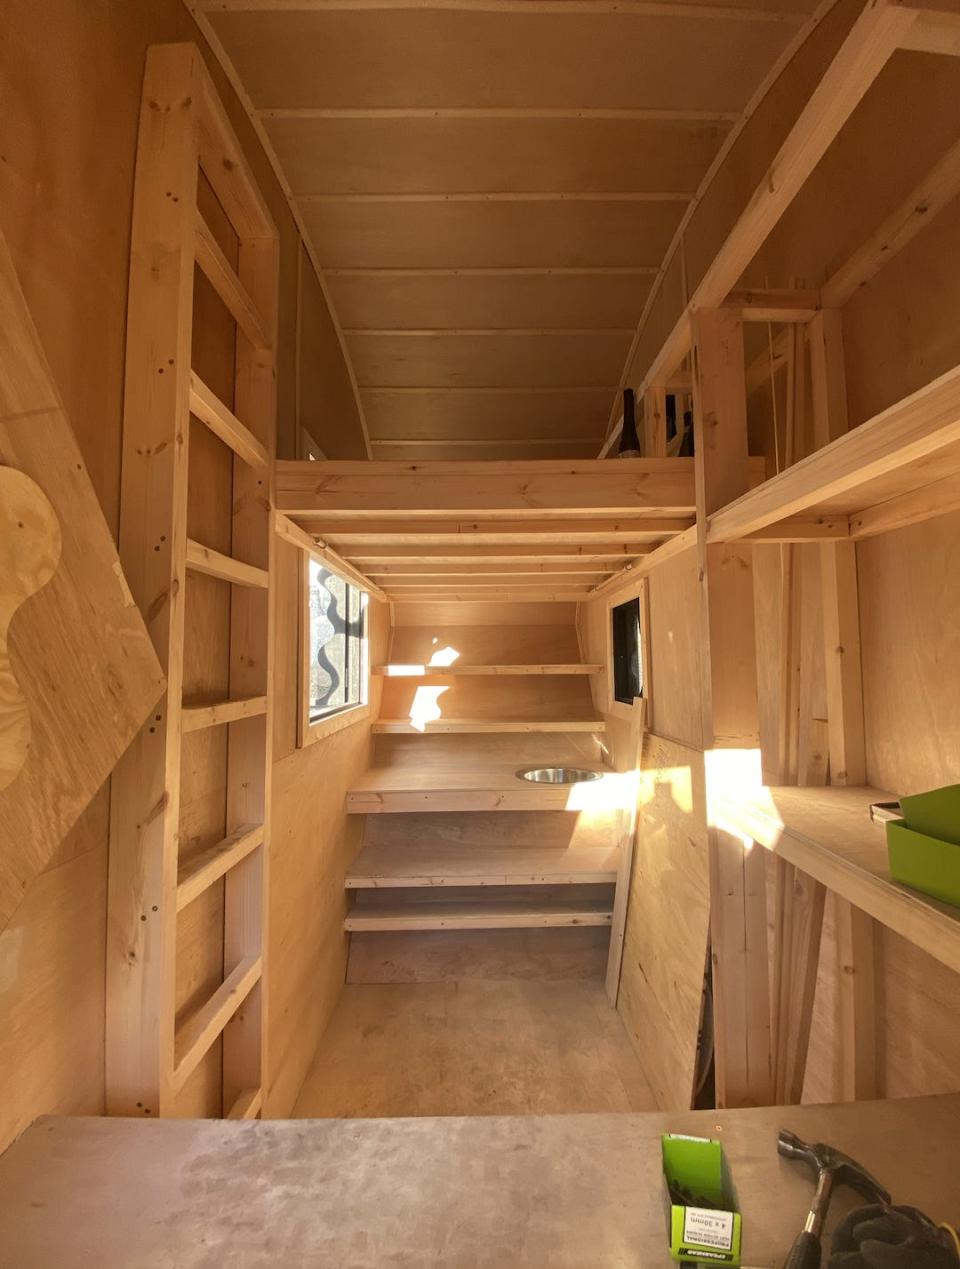 inside the tiny home with the early fittings